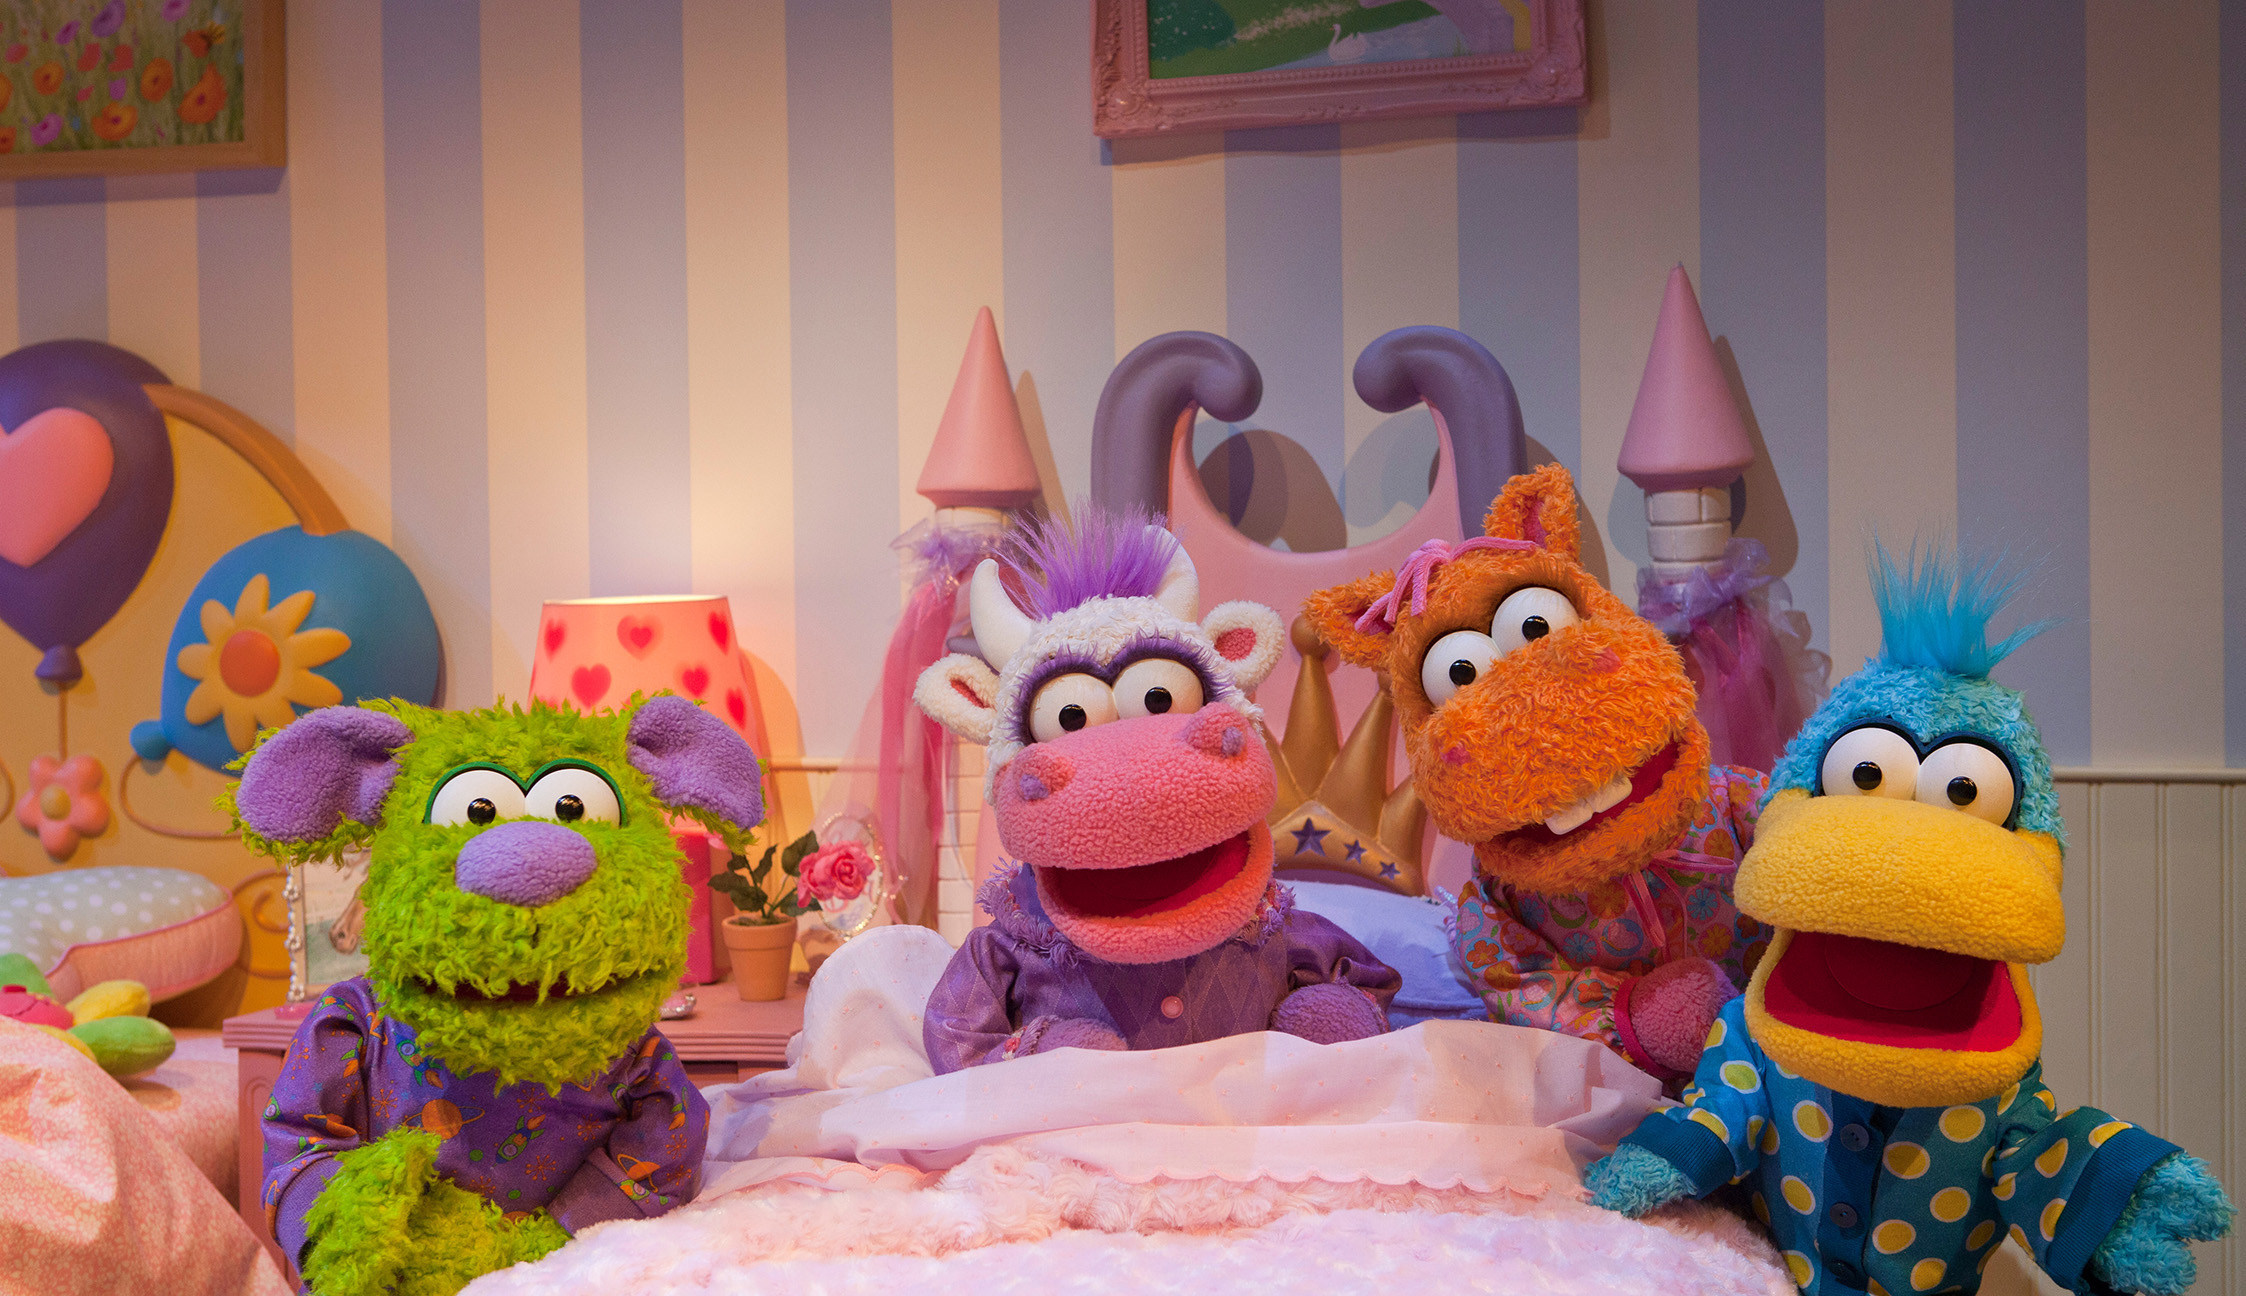 JIM HENSON’S FAMILY HUB LAUNCHES KIDS SAFE CHANNEL ON YOUTUBE